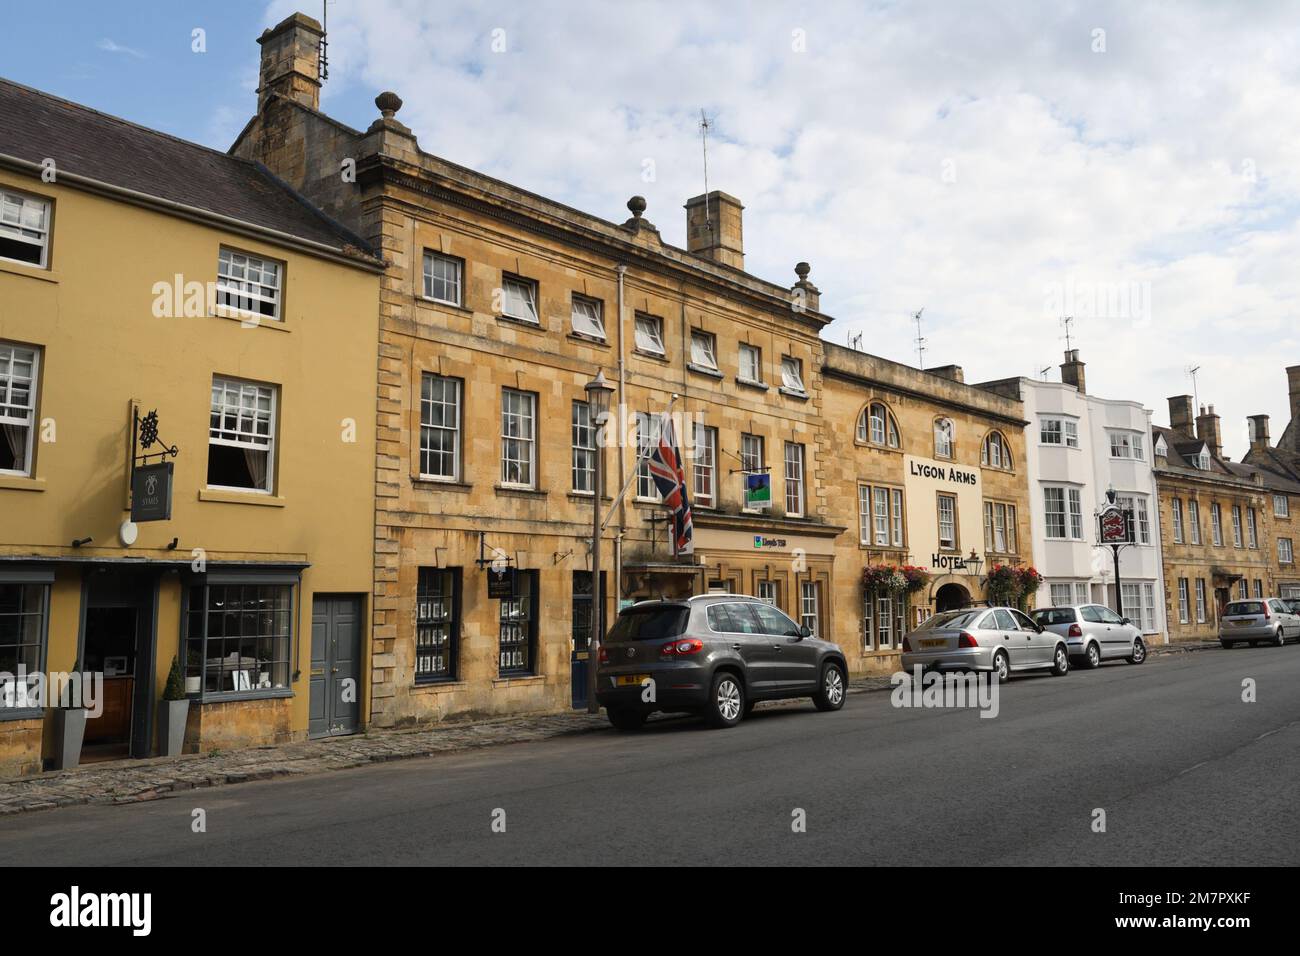 Chipping Campden High Street England, market town in the English Cotswolds. British Legion and Lloyd bank building, grade II* listed building Stock Photo